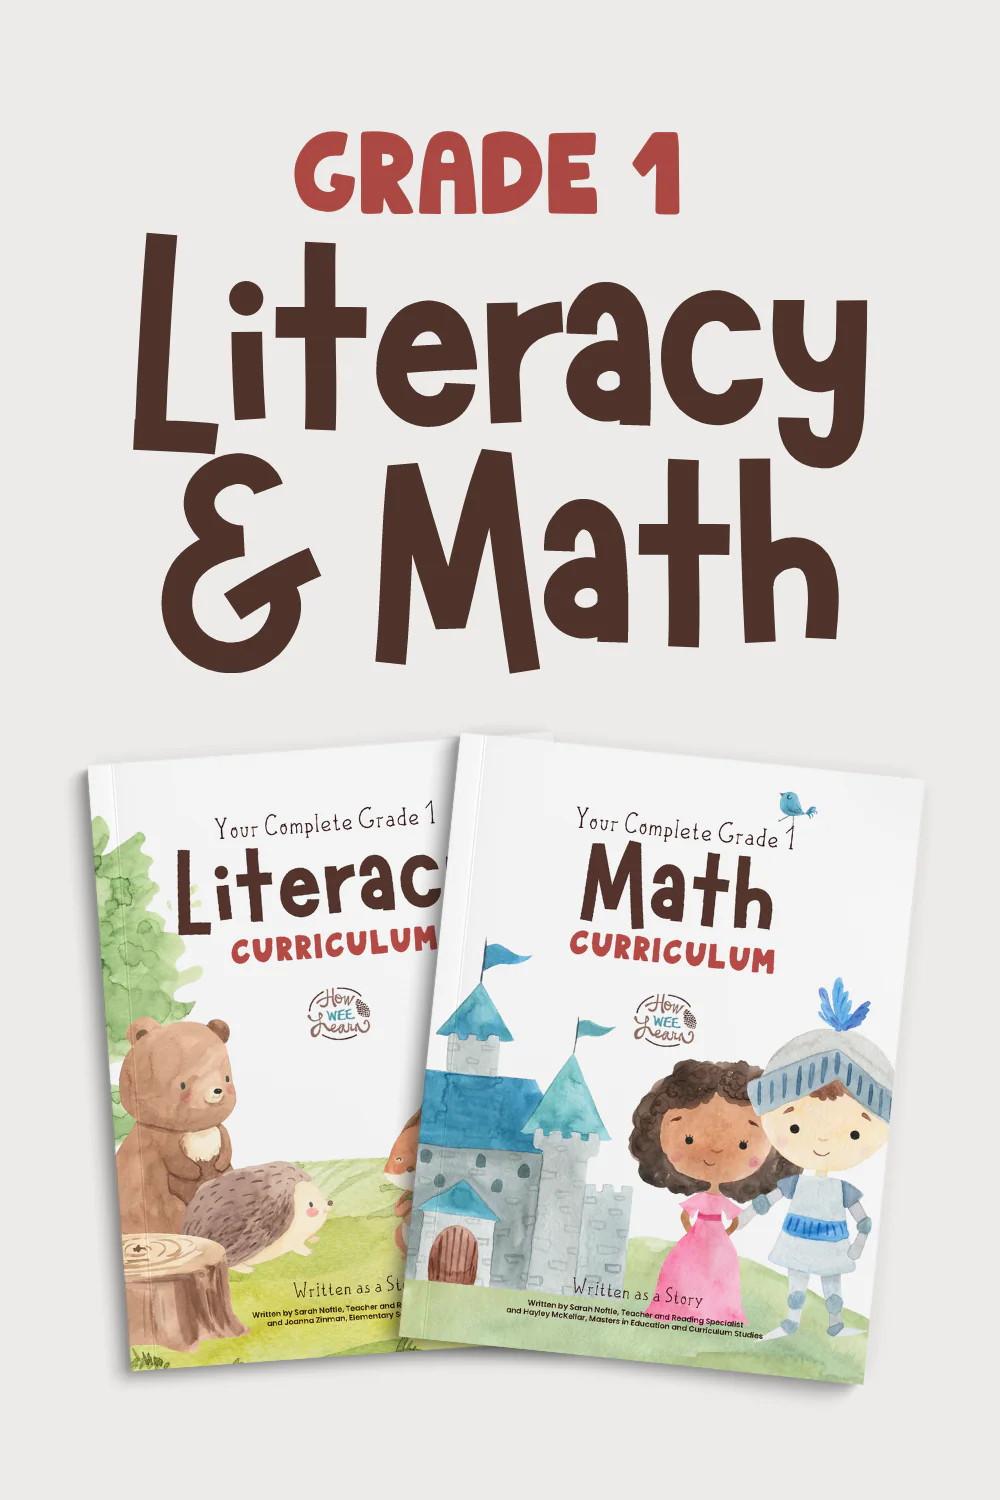 How Wee Learn Grade 1 Literacy and Math Curriculum